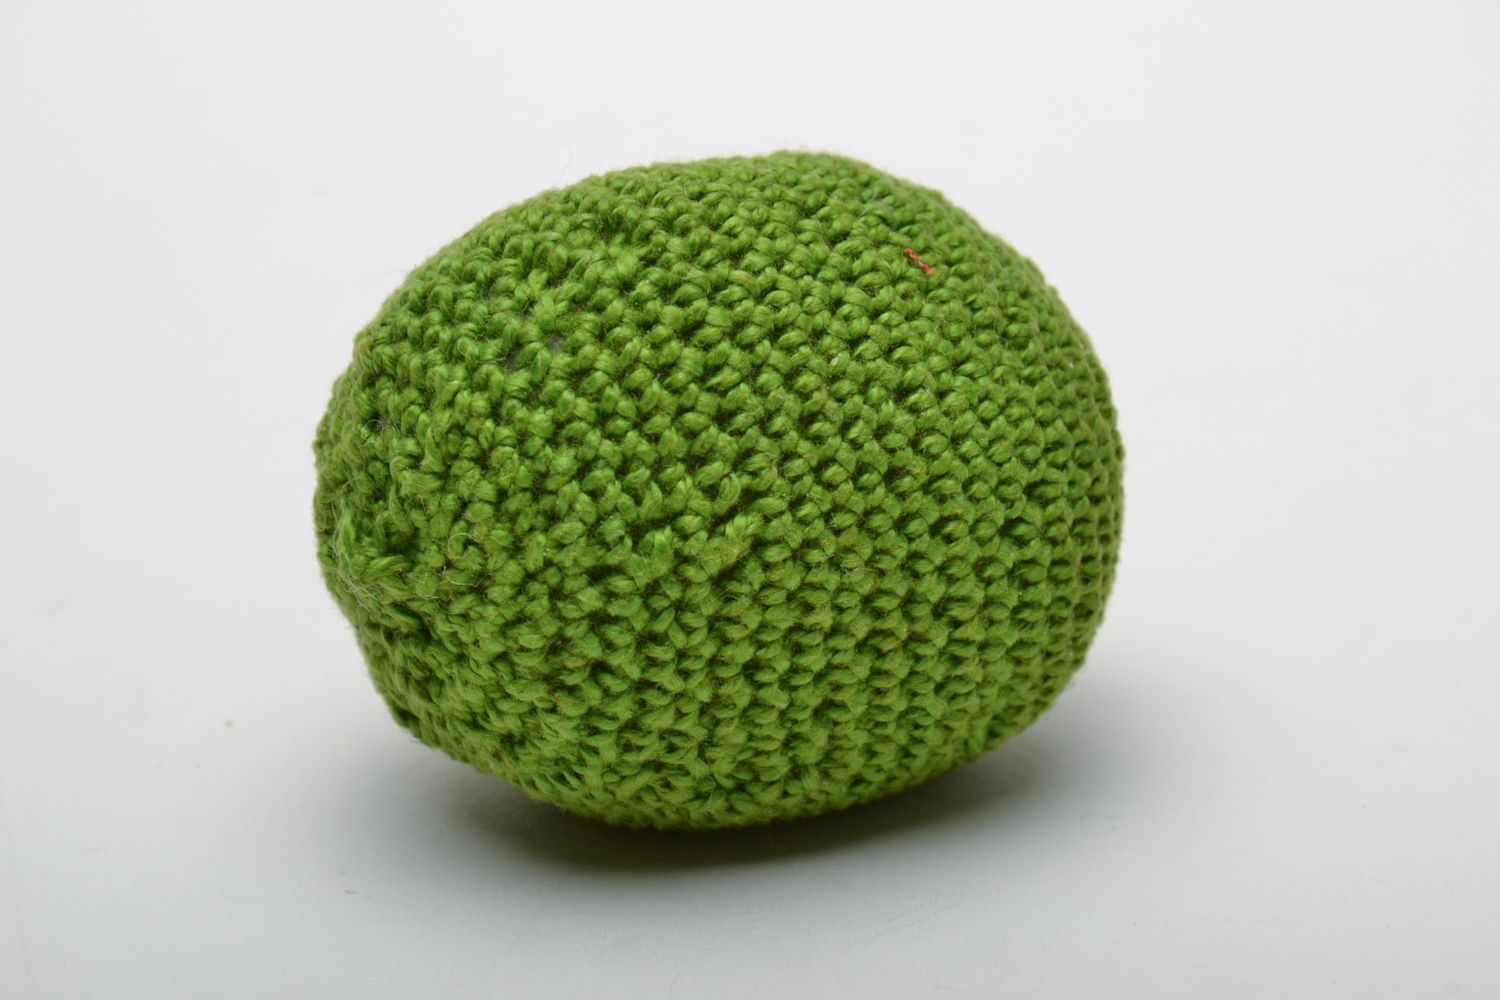 Crochet toy lime made of natural materials photo 3